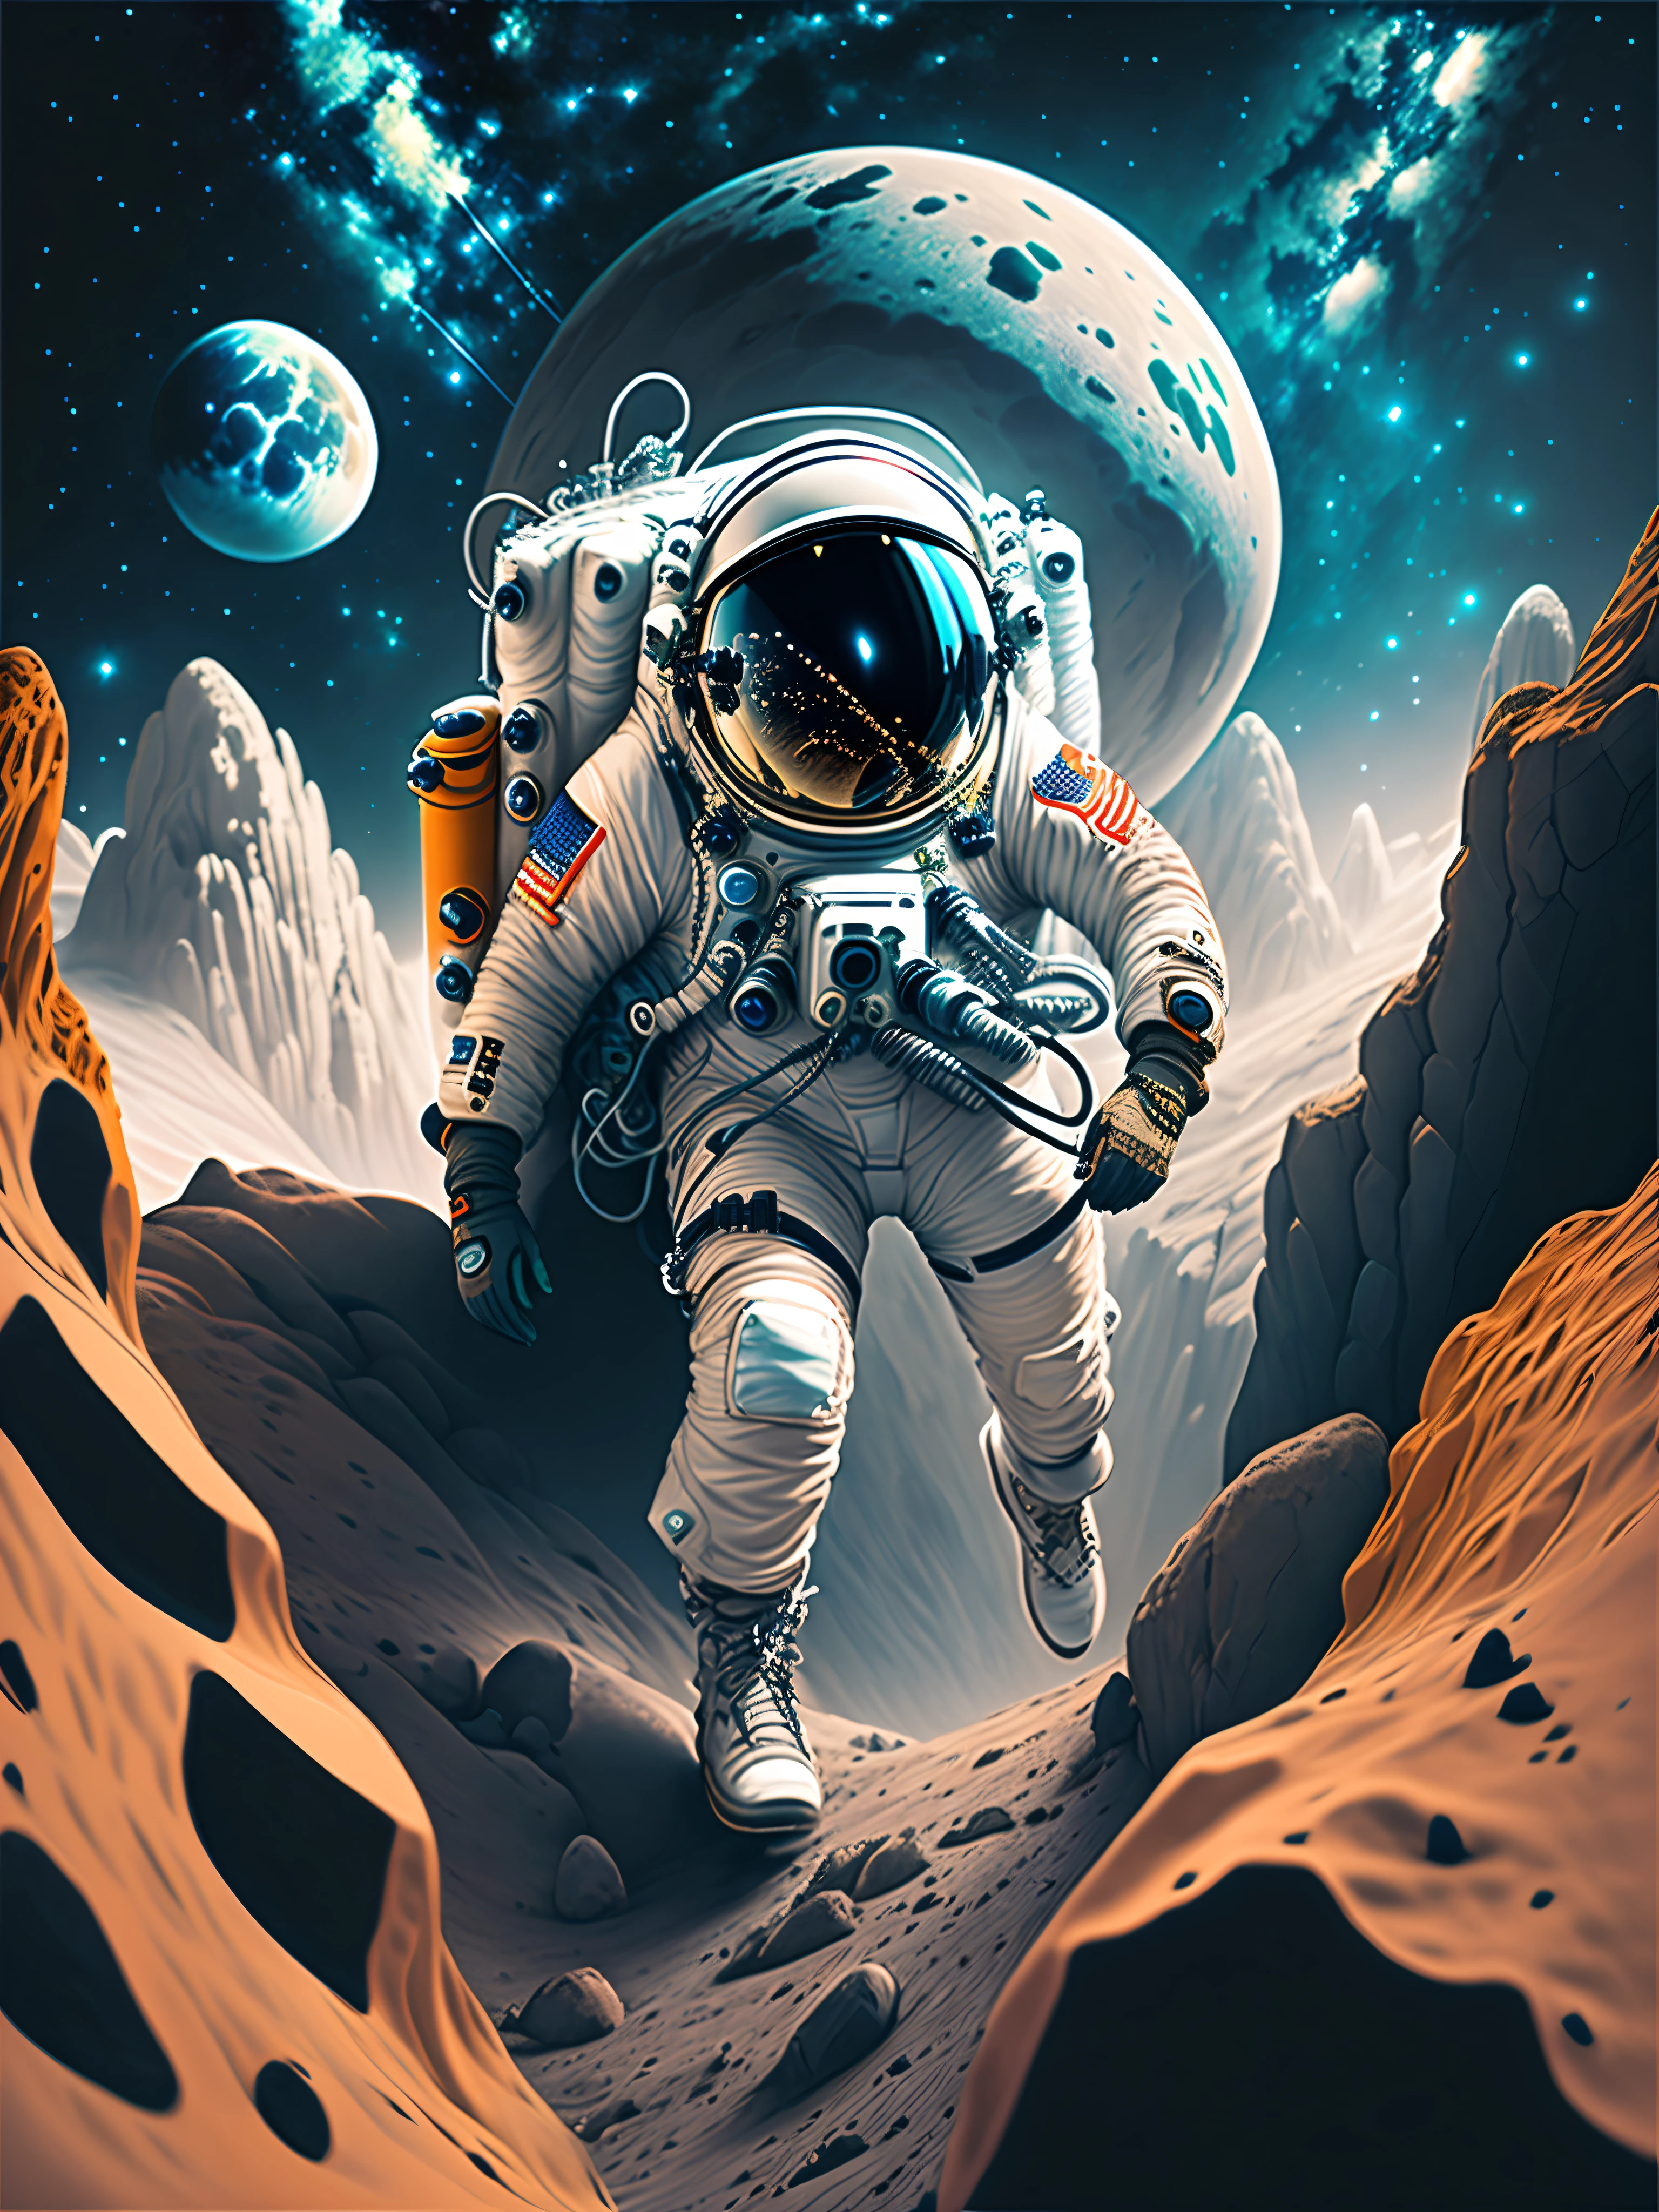 (Close-up of astronaut climbing a rocky cliff in a spacesuit), fully space suited, astronaut lost in liminal space, dusty space suit, Astronaut, astronaut in space, ("Lunar space" Theme）, detailed astronaut, astronaut in space, Spacesuit, Redshift resonance, （Astronauts climbing cliffs in space）, astronaut below, space backround, wear spacesuits, Astronaut Cyberpunk Electric, space